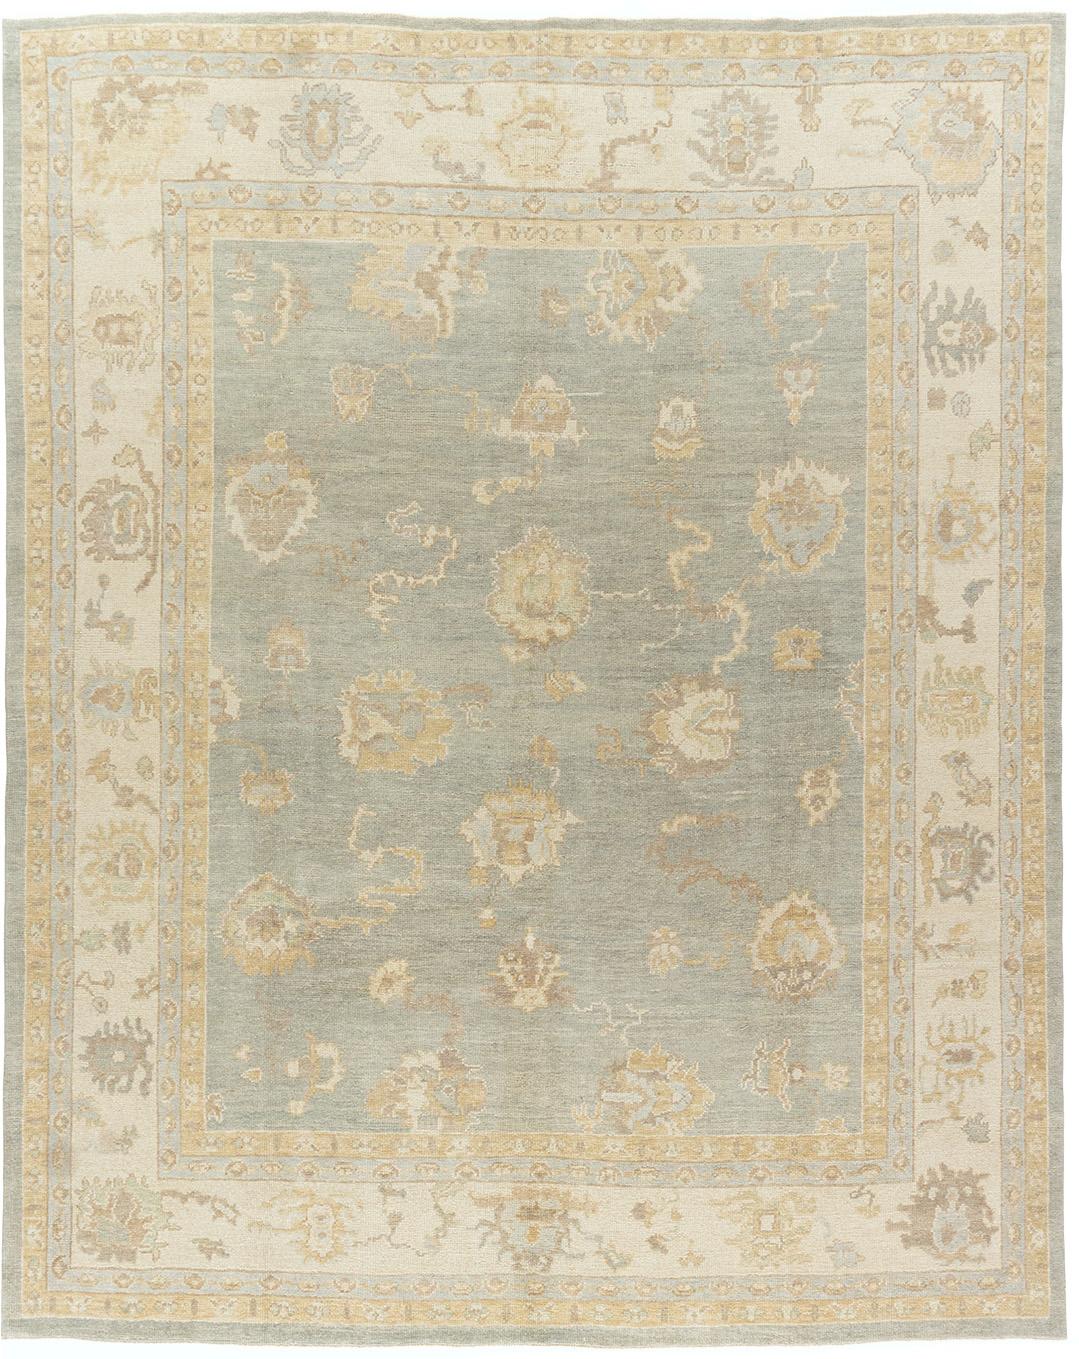 Classic Style Oushak hand knotted rug, 9' x 11'. A recreation of a Classic Oushak rug using the finest of material and handwoven in India by true craftsmen. Colors: blues/grays/ivory.